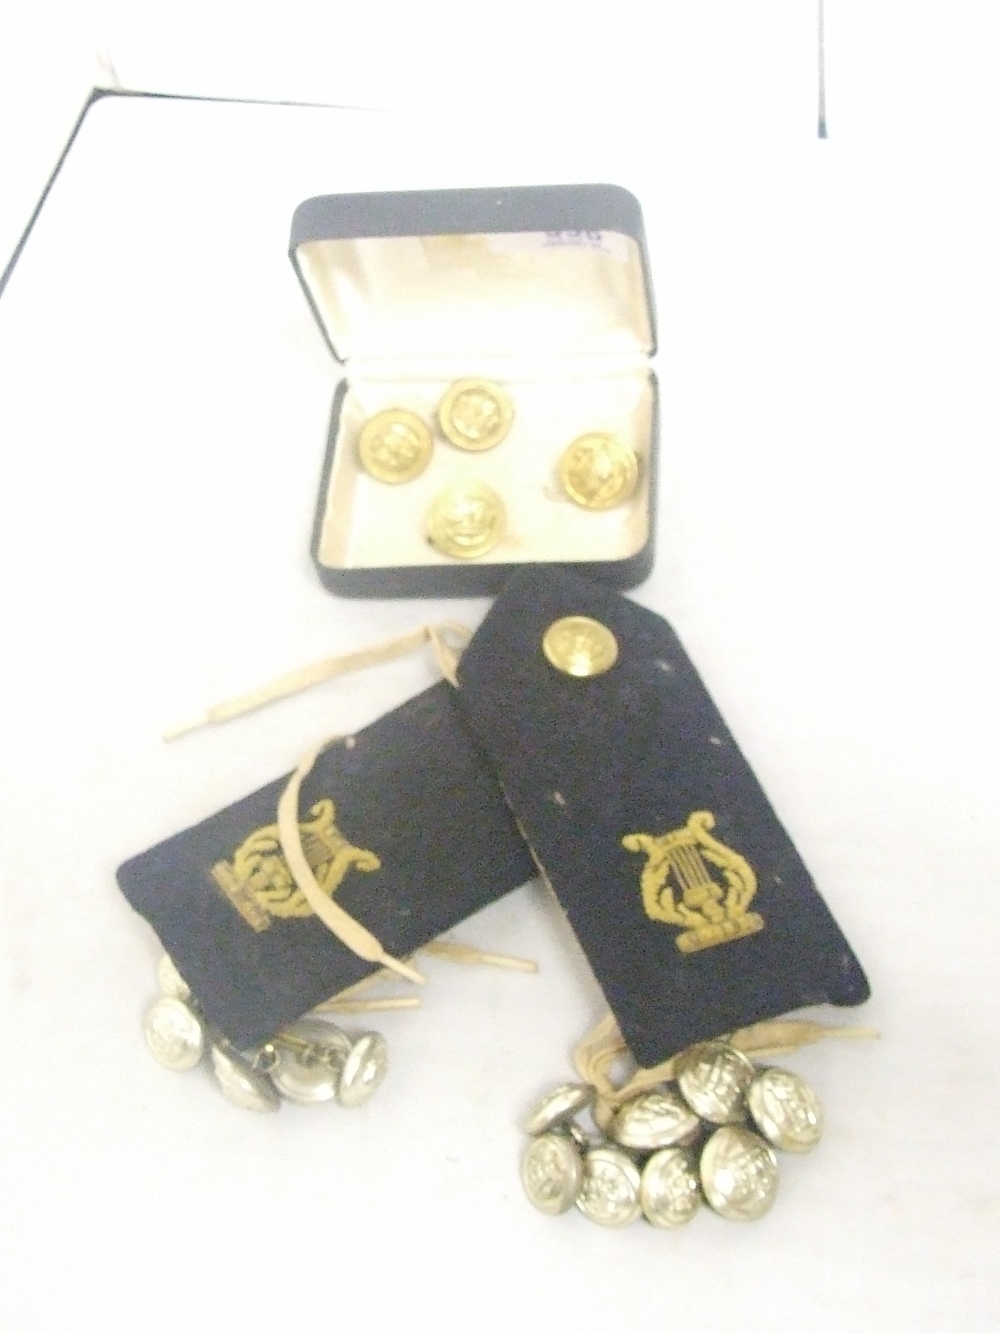 A selection of military/naval buttons and epaulettes